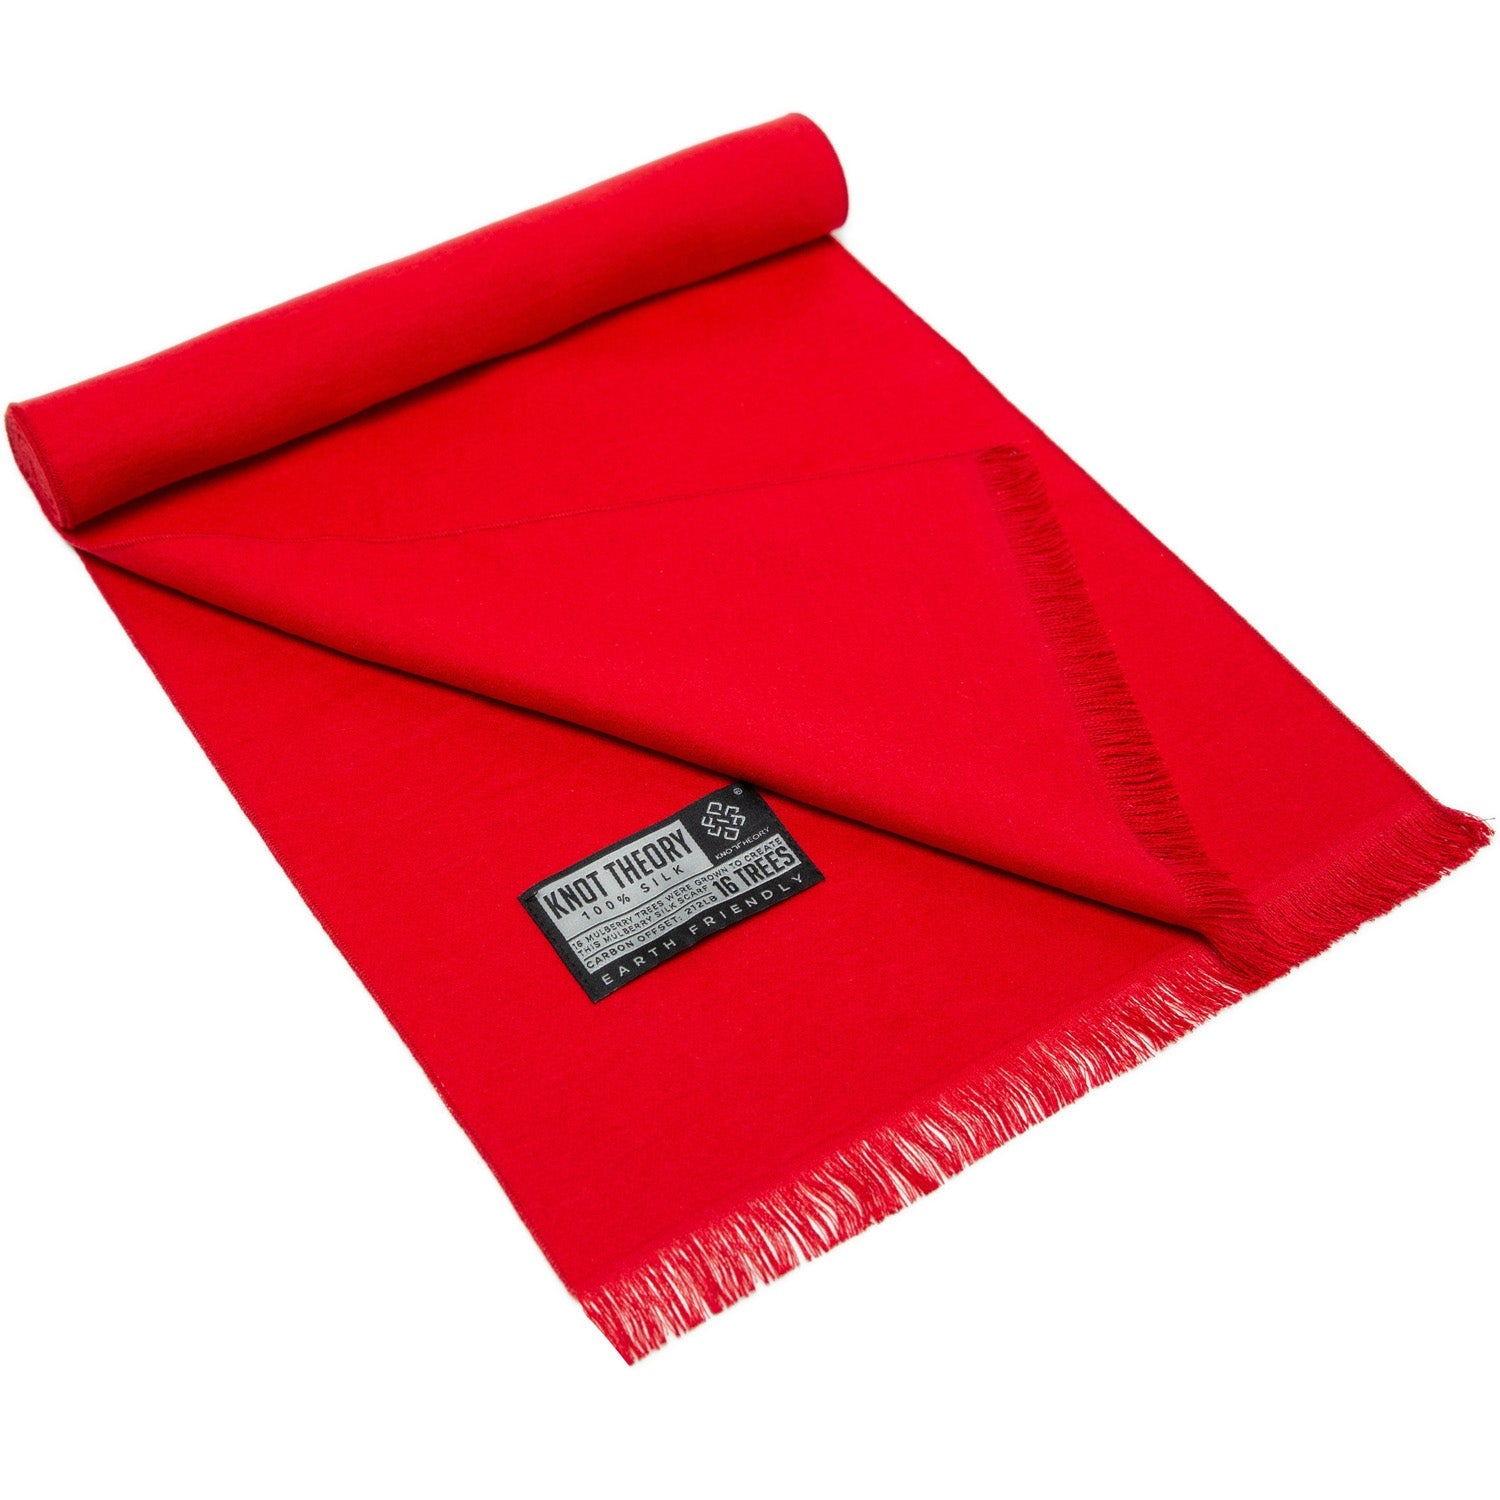 Red Eco Silk Scarf - Softer than Cashmere 100% Silk - Knot Theory